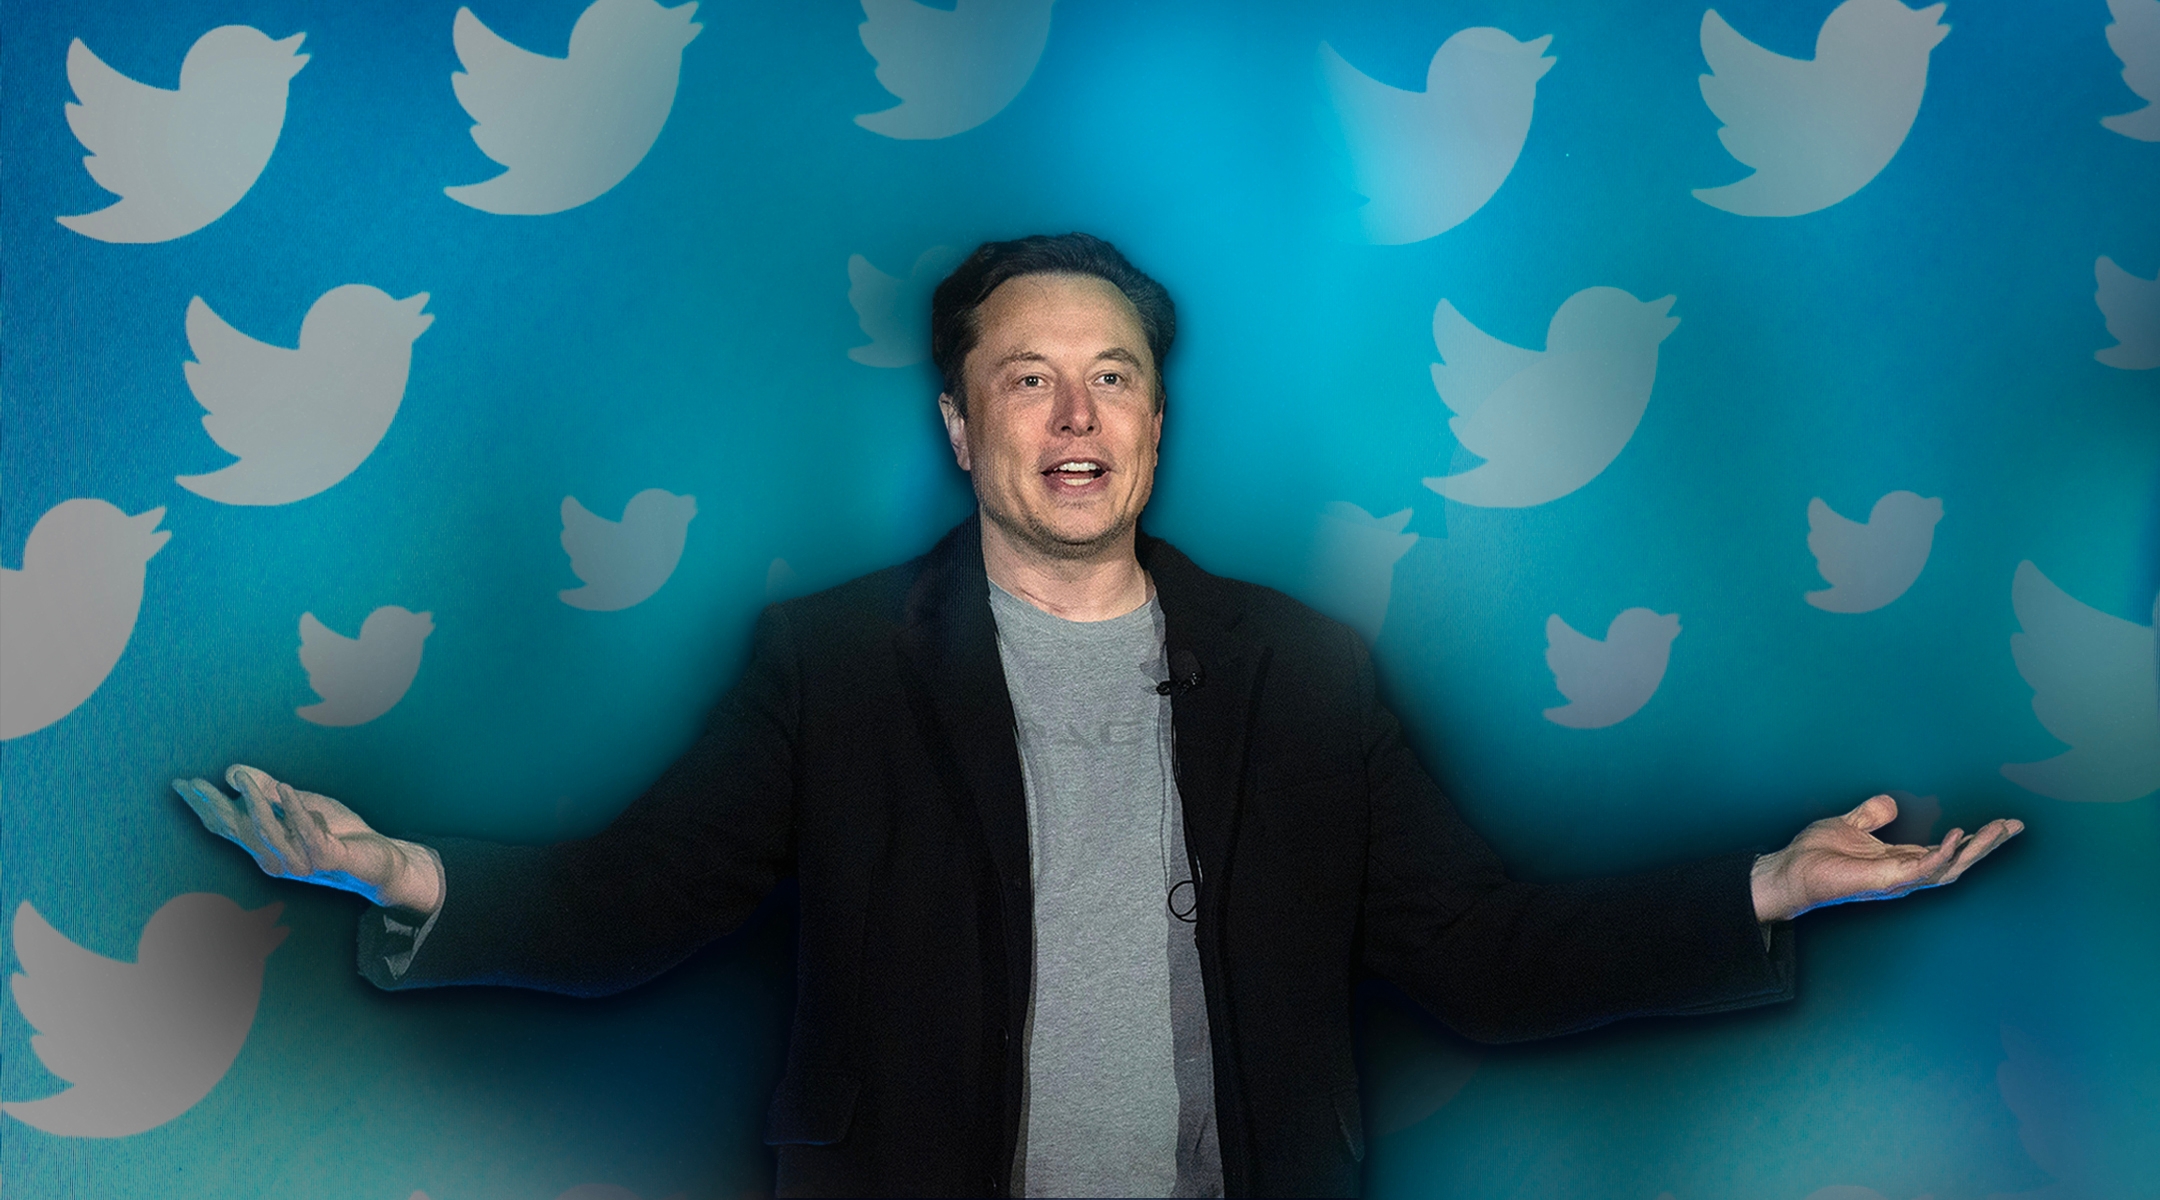 Tesla CEO Elon Musk has enough Twitter followers to make anything go viral.